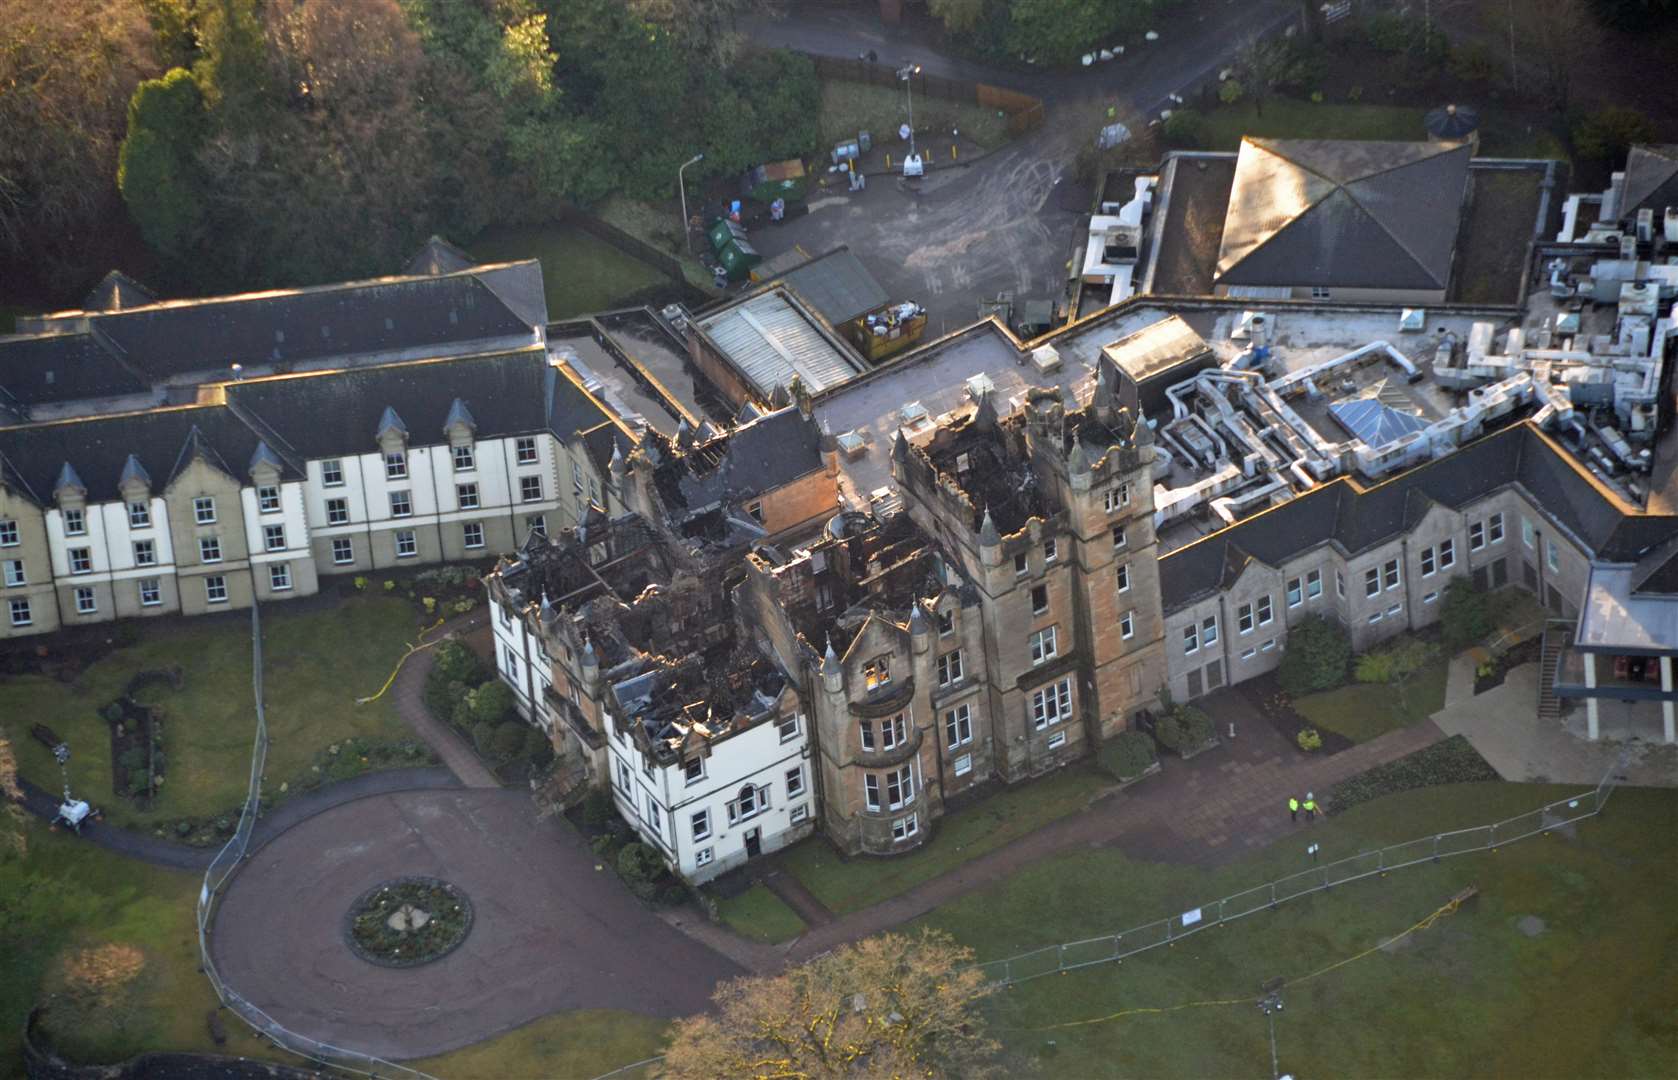 The hotel operator was fined £500,000 over the blaze (Crown Office/PA)